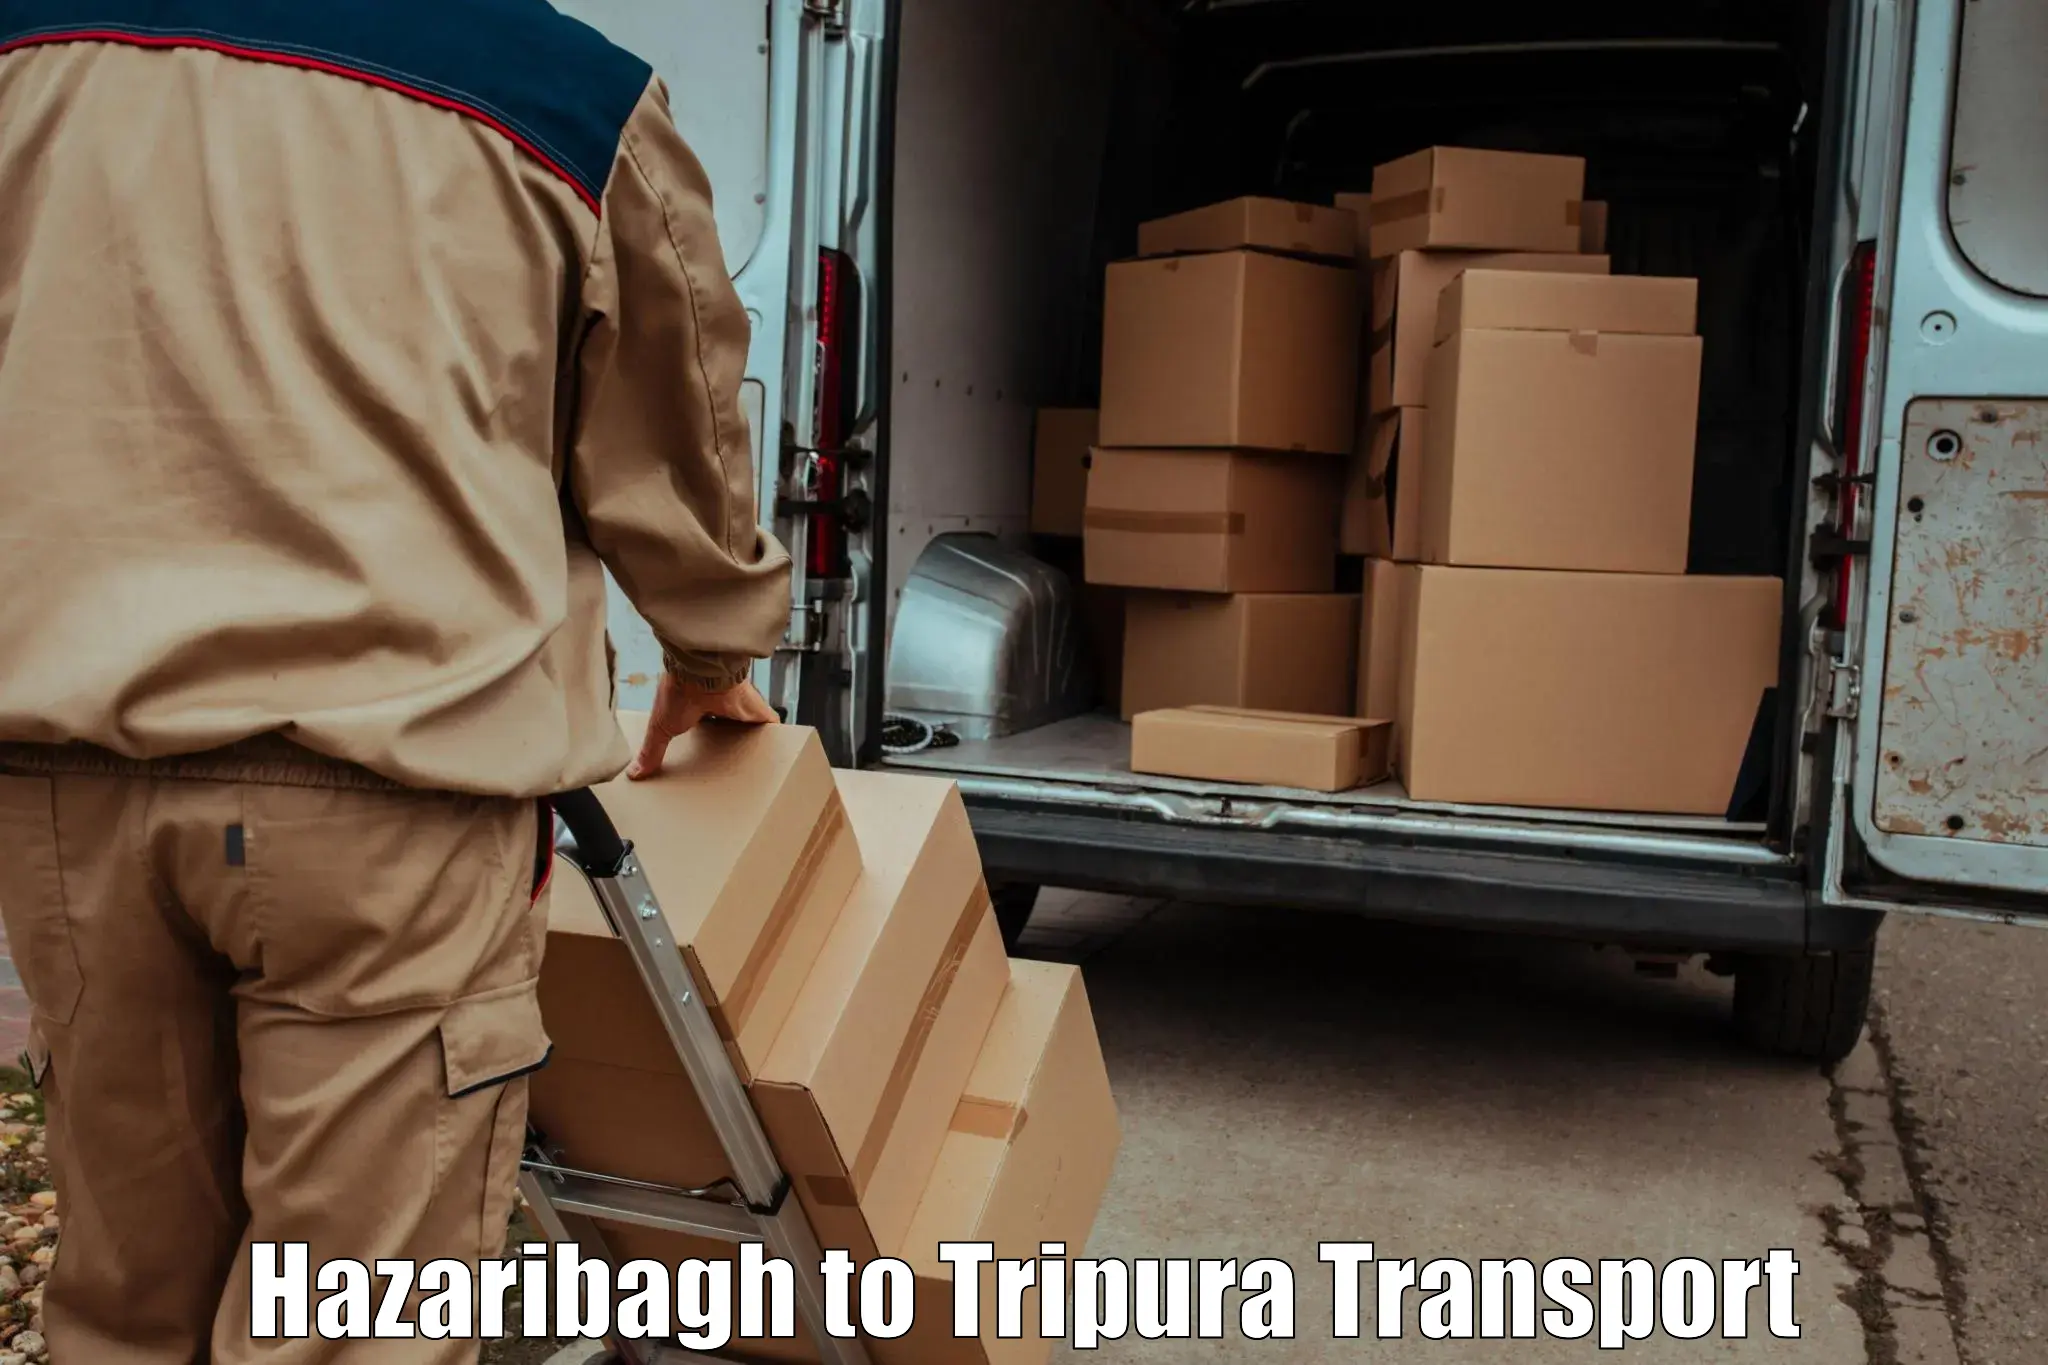 Container transportation services in Hazaribagh to Agartala